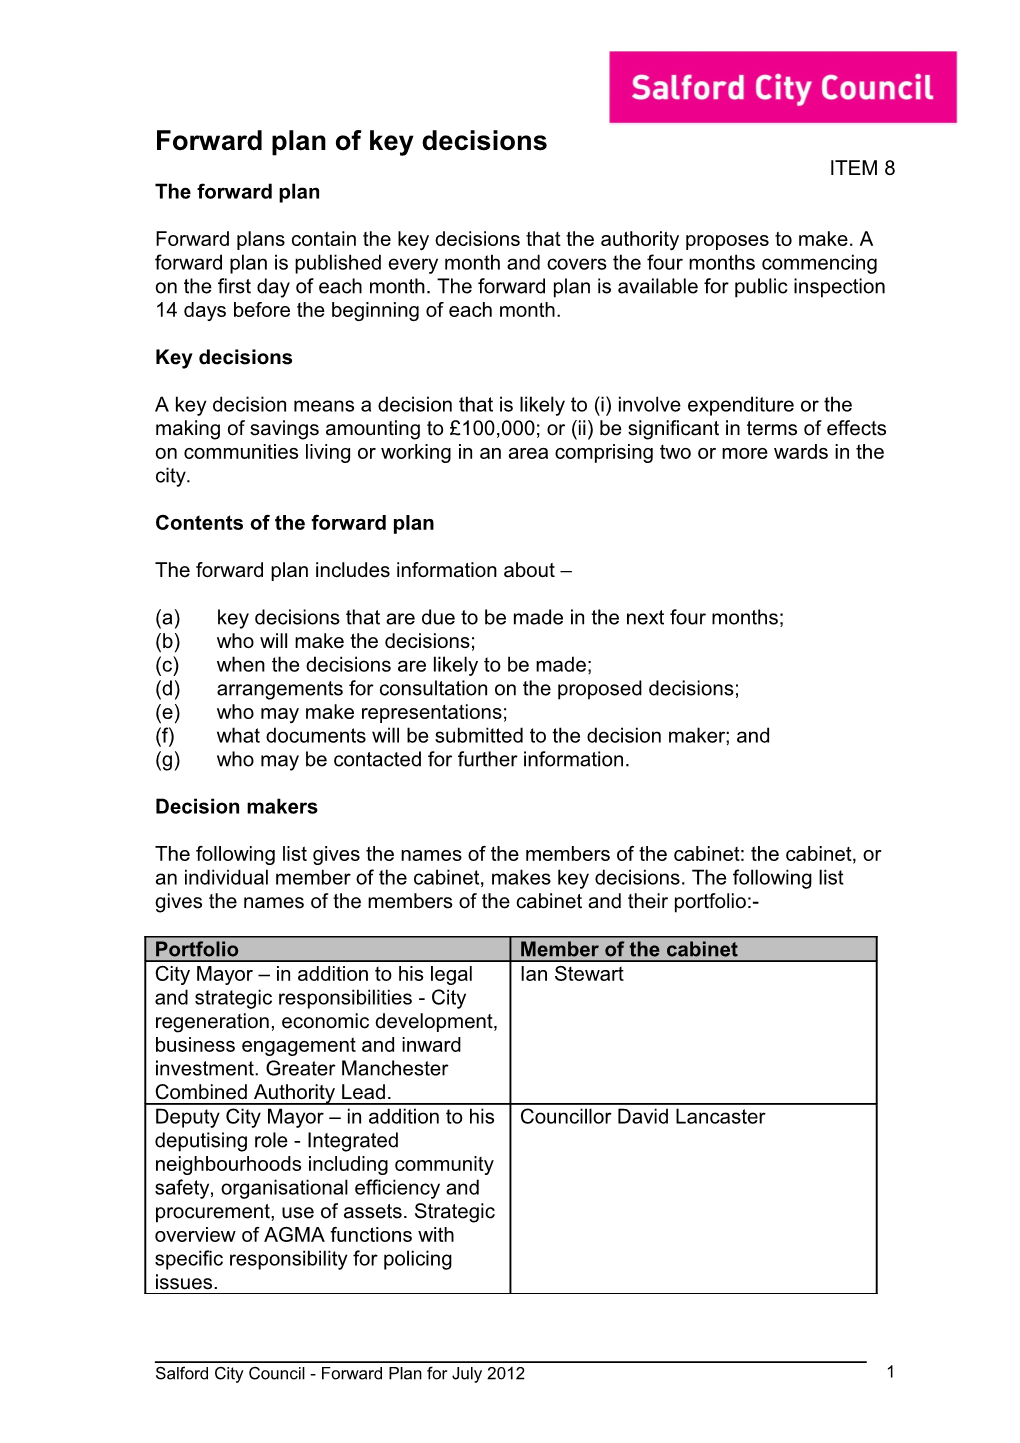 Local Government Act 2000 - Forward Plan